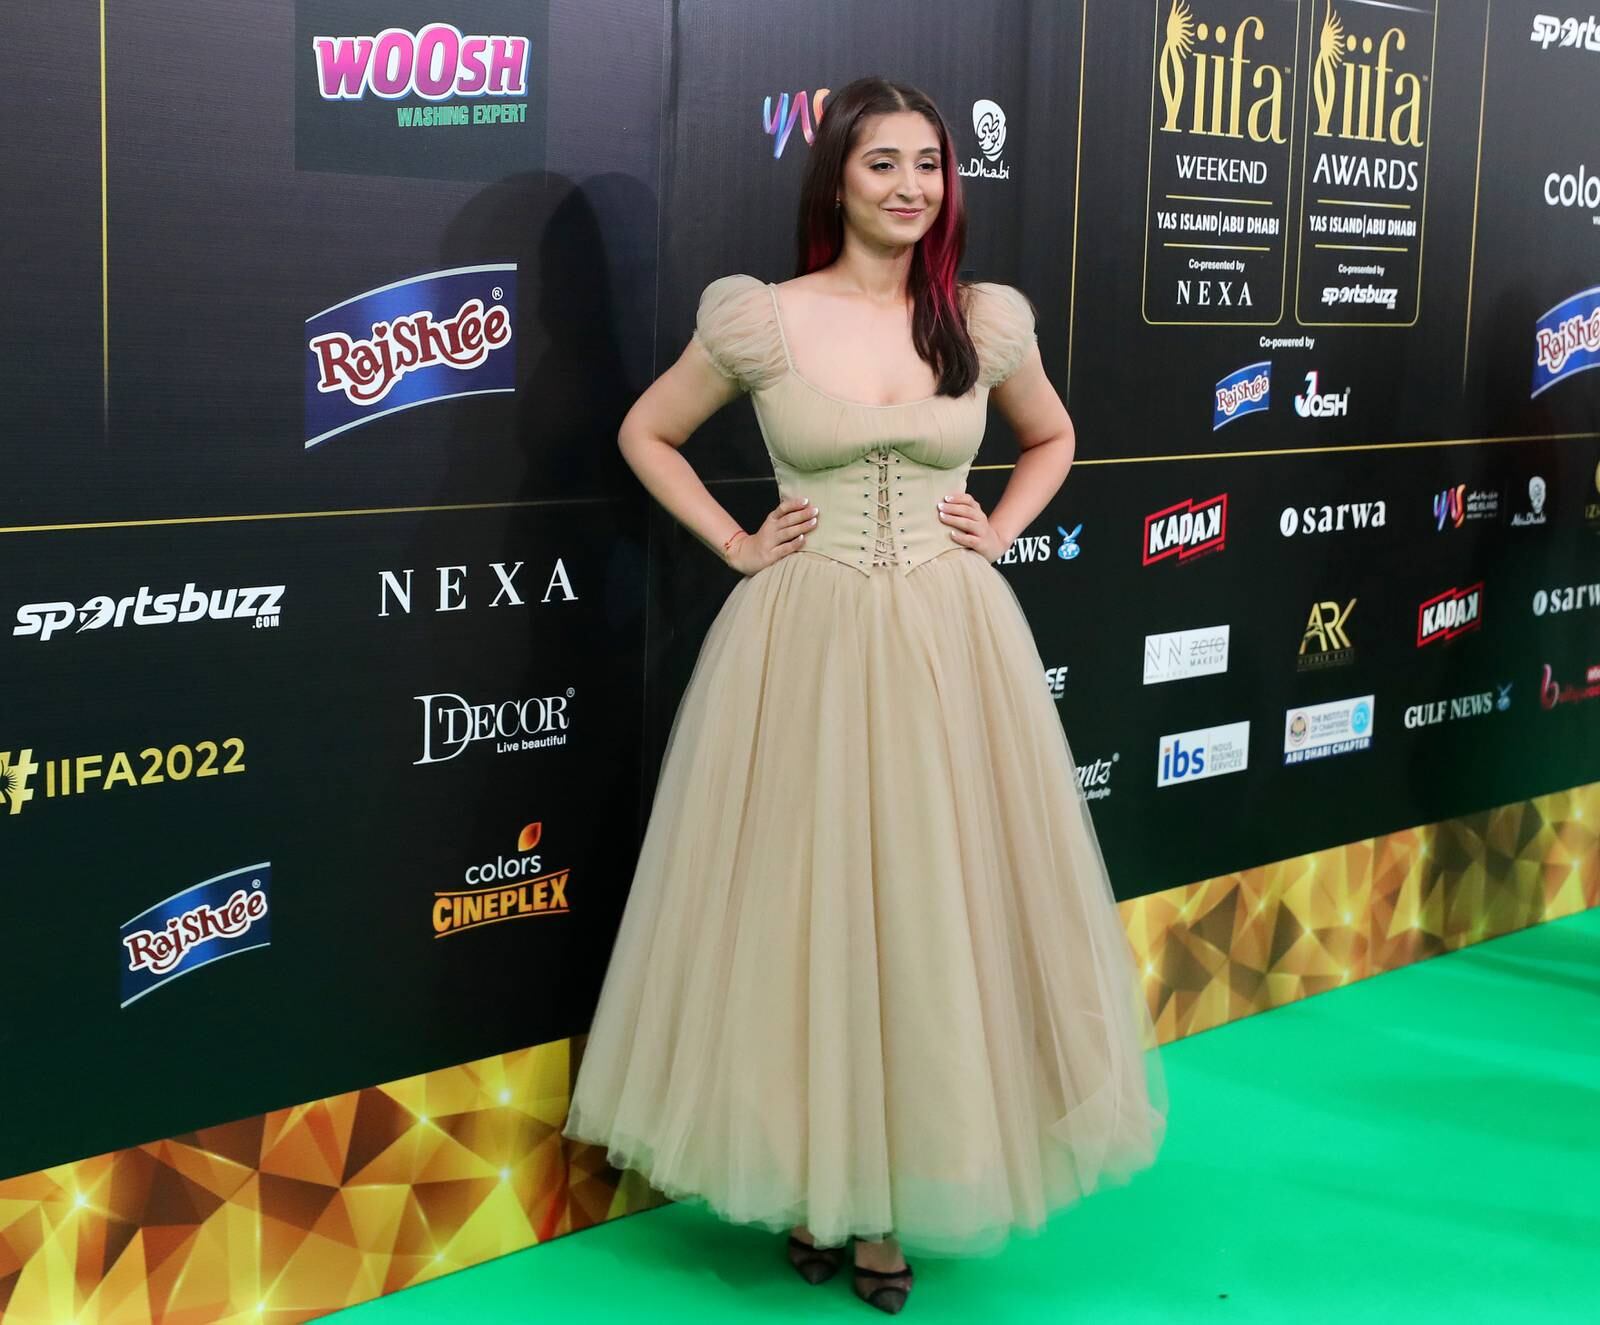 IIFA Awards 2022 live 'Shershaah' wins Best Picture